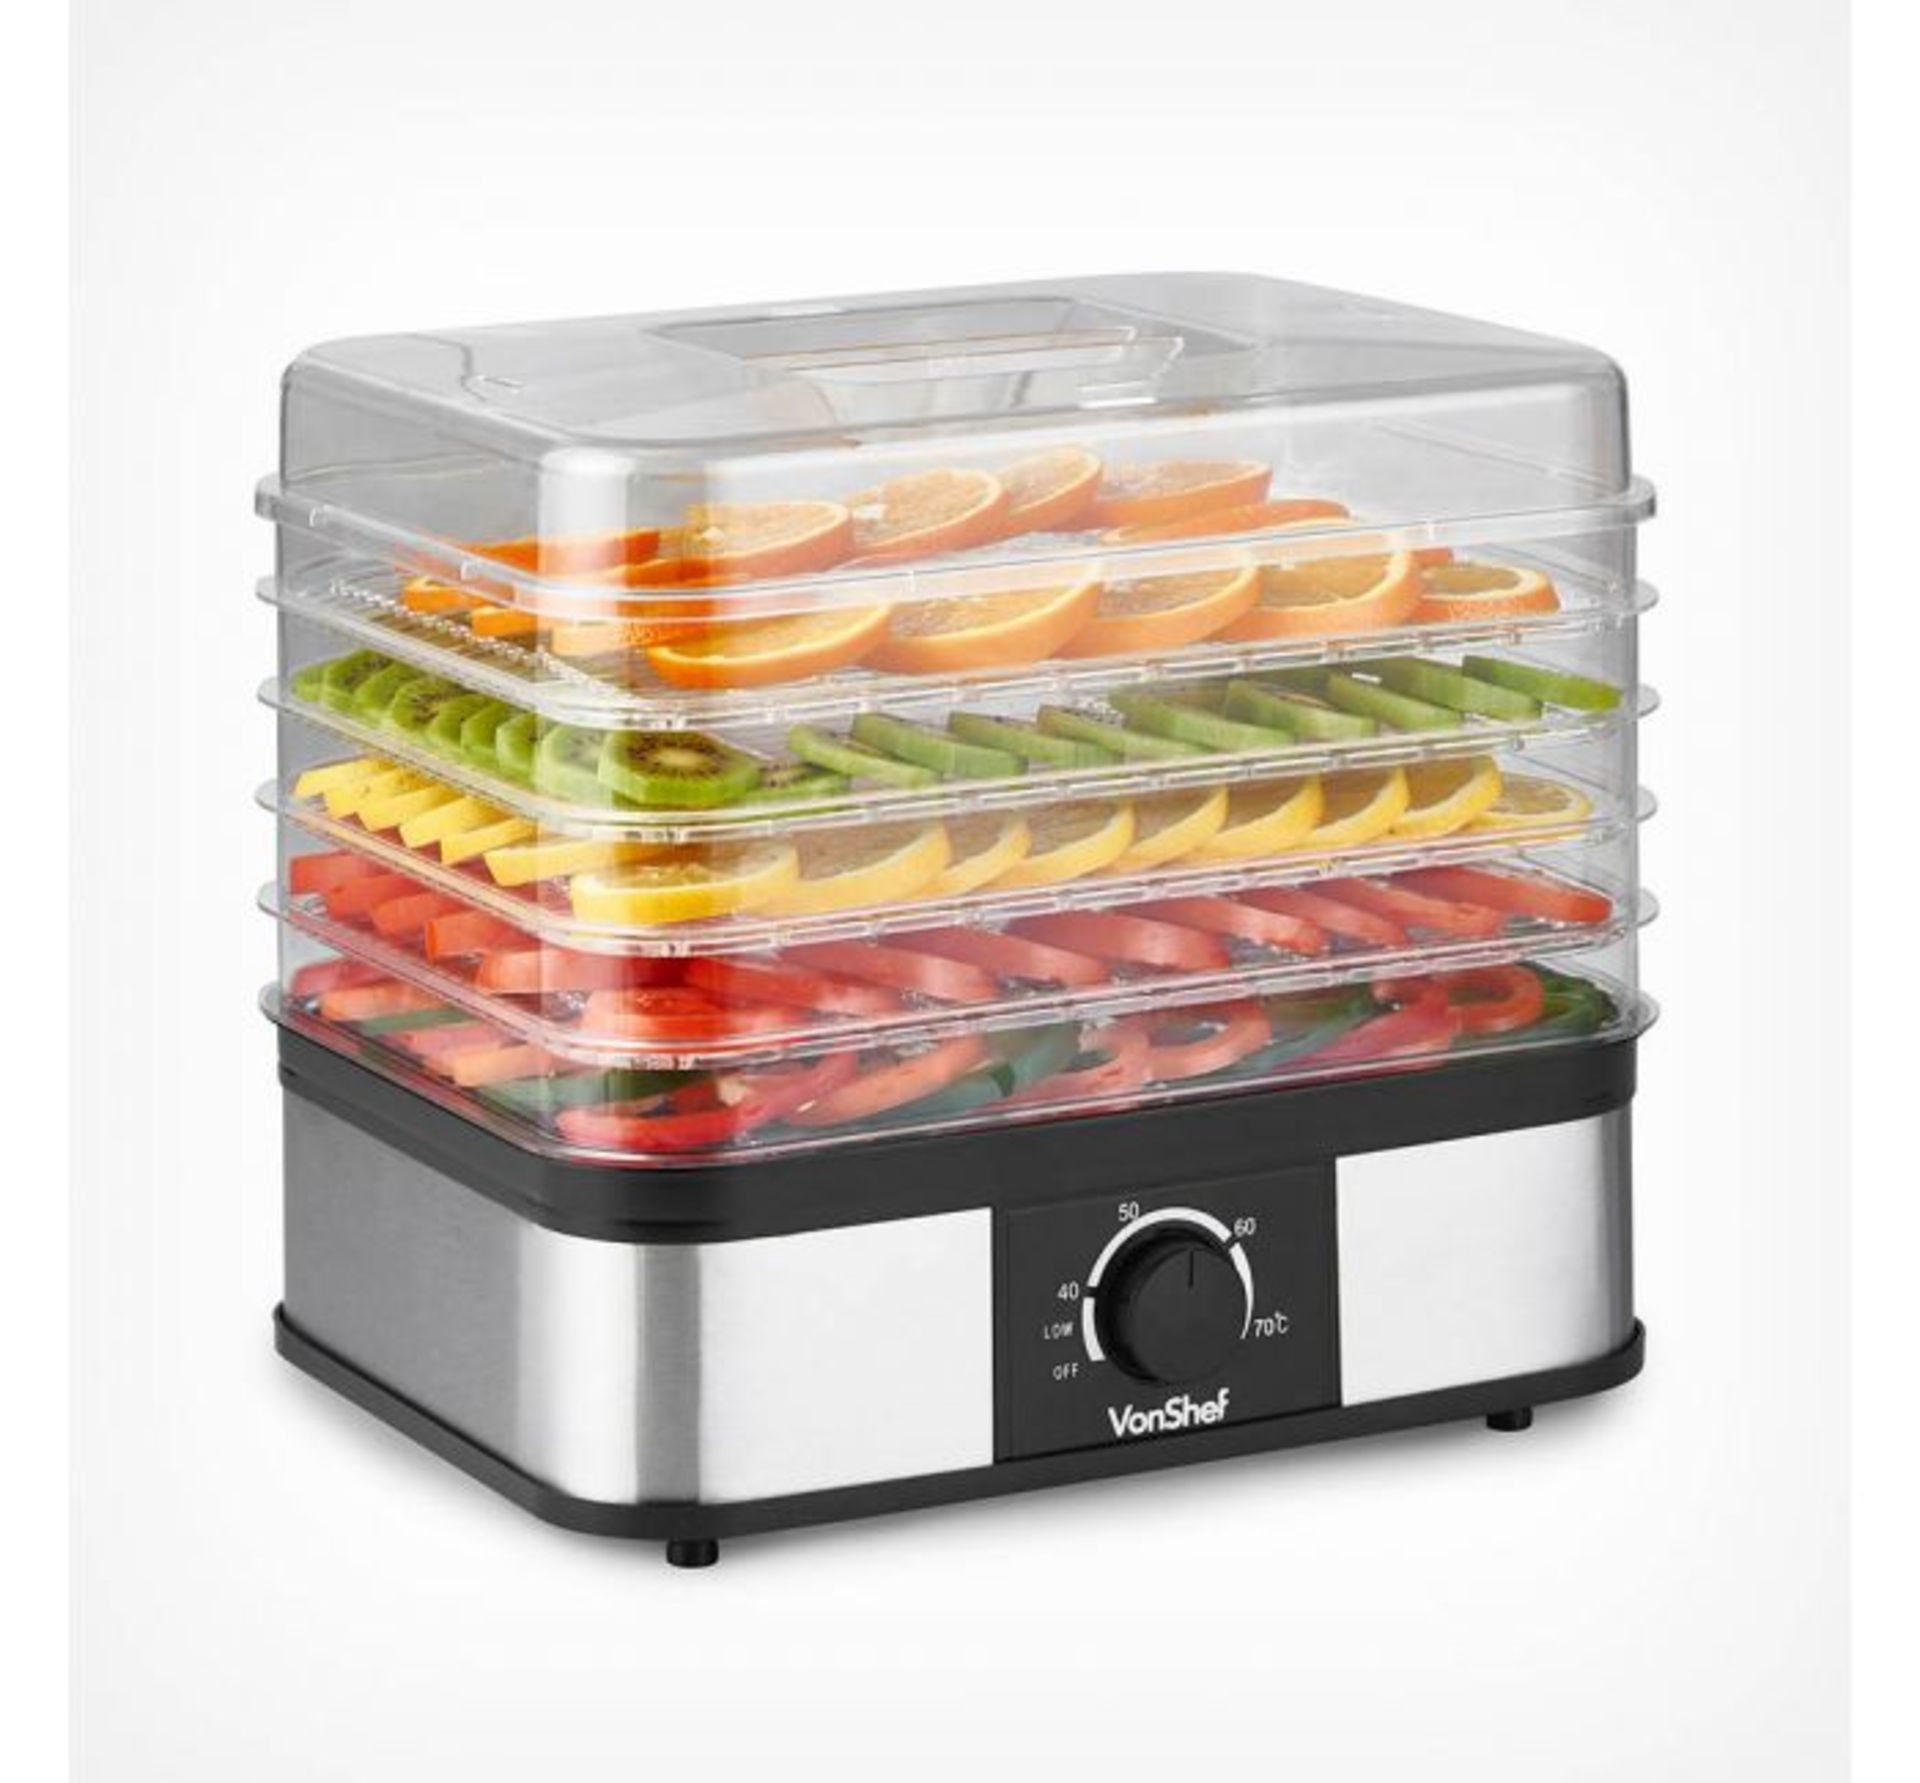 (TD1) 5 Tier Food Dehydrator Ideal for creating beef jerky, banana chips, dried fruits and mor... - Image 2 of 2